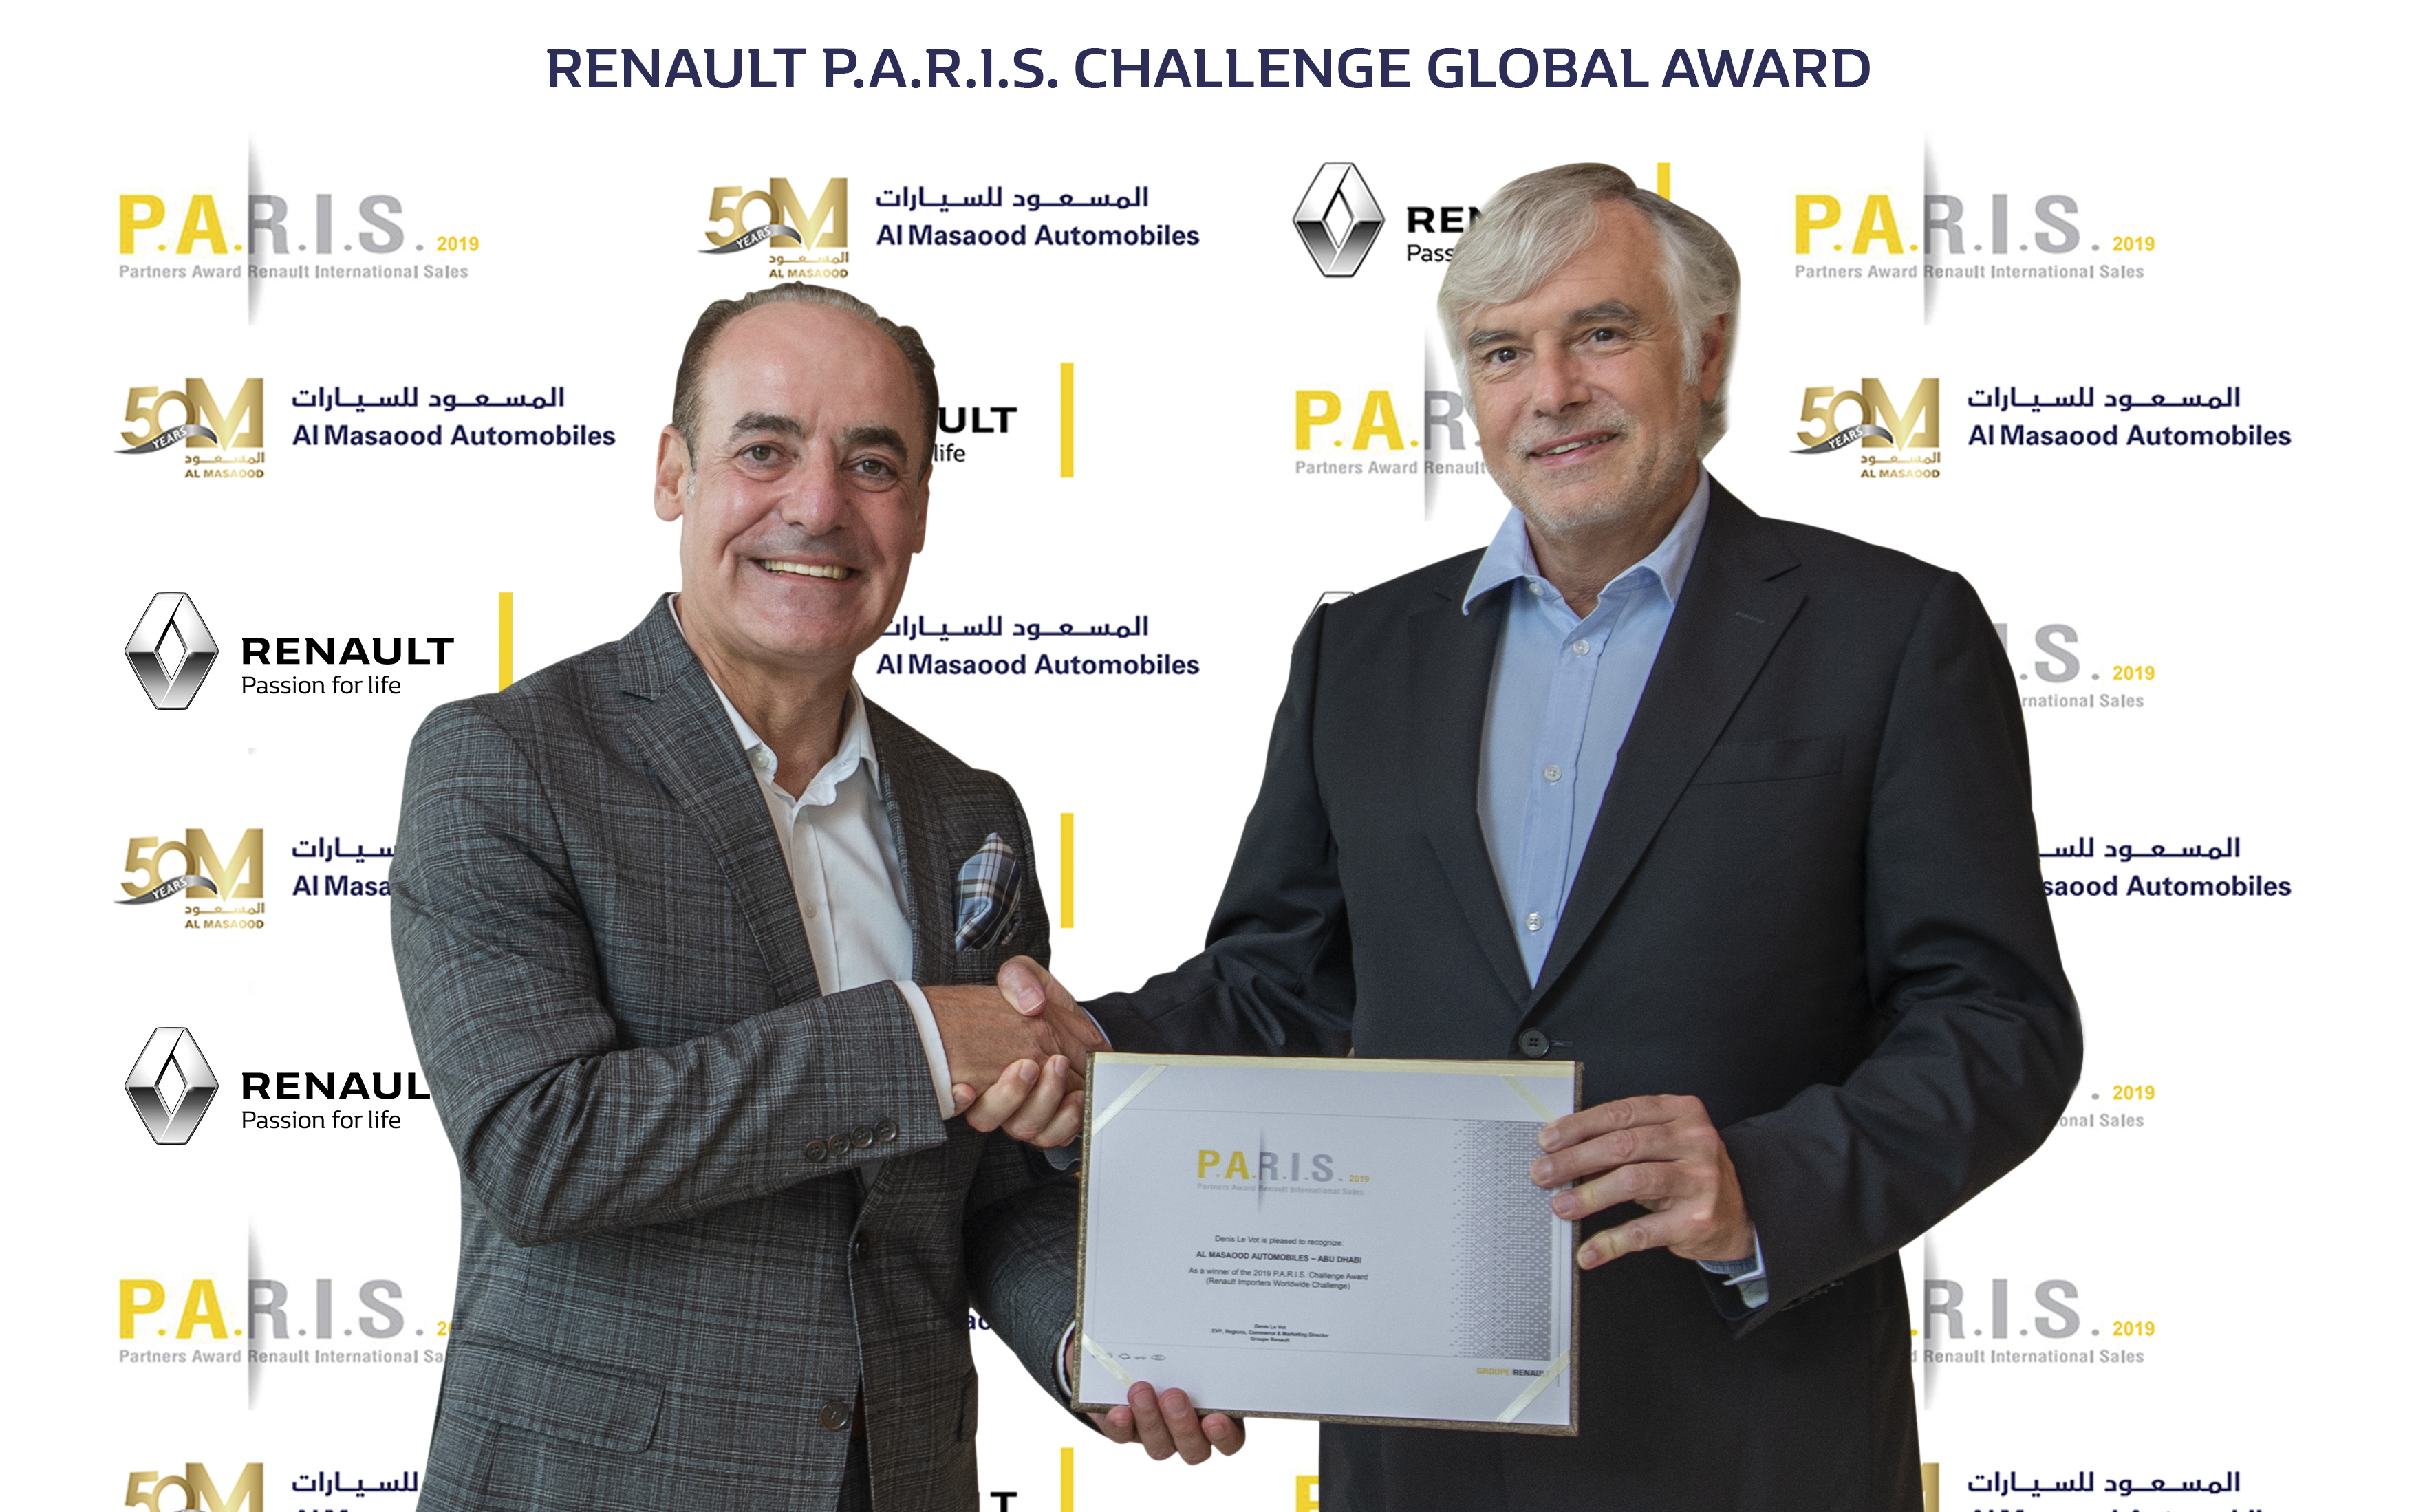 Al Masaood Automobiles wins the prestigious “Renault Global Partners Award, P.A.R.I.S. Challenge” for the fiscal year 2019